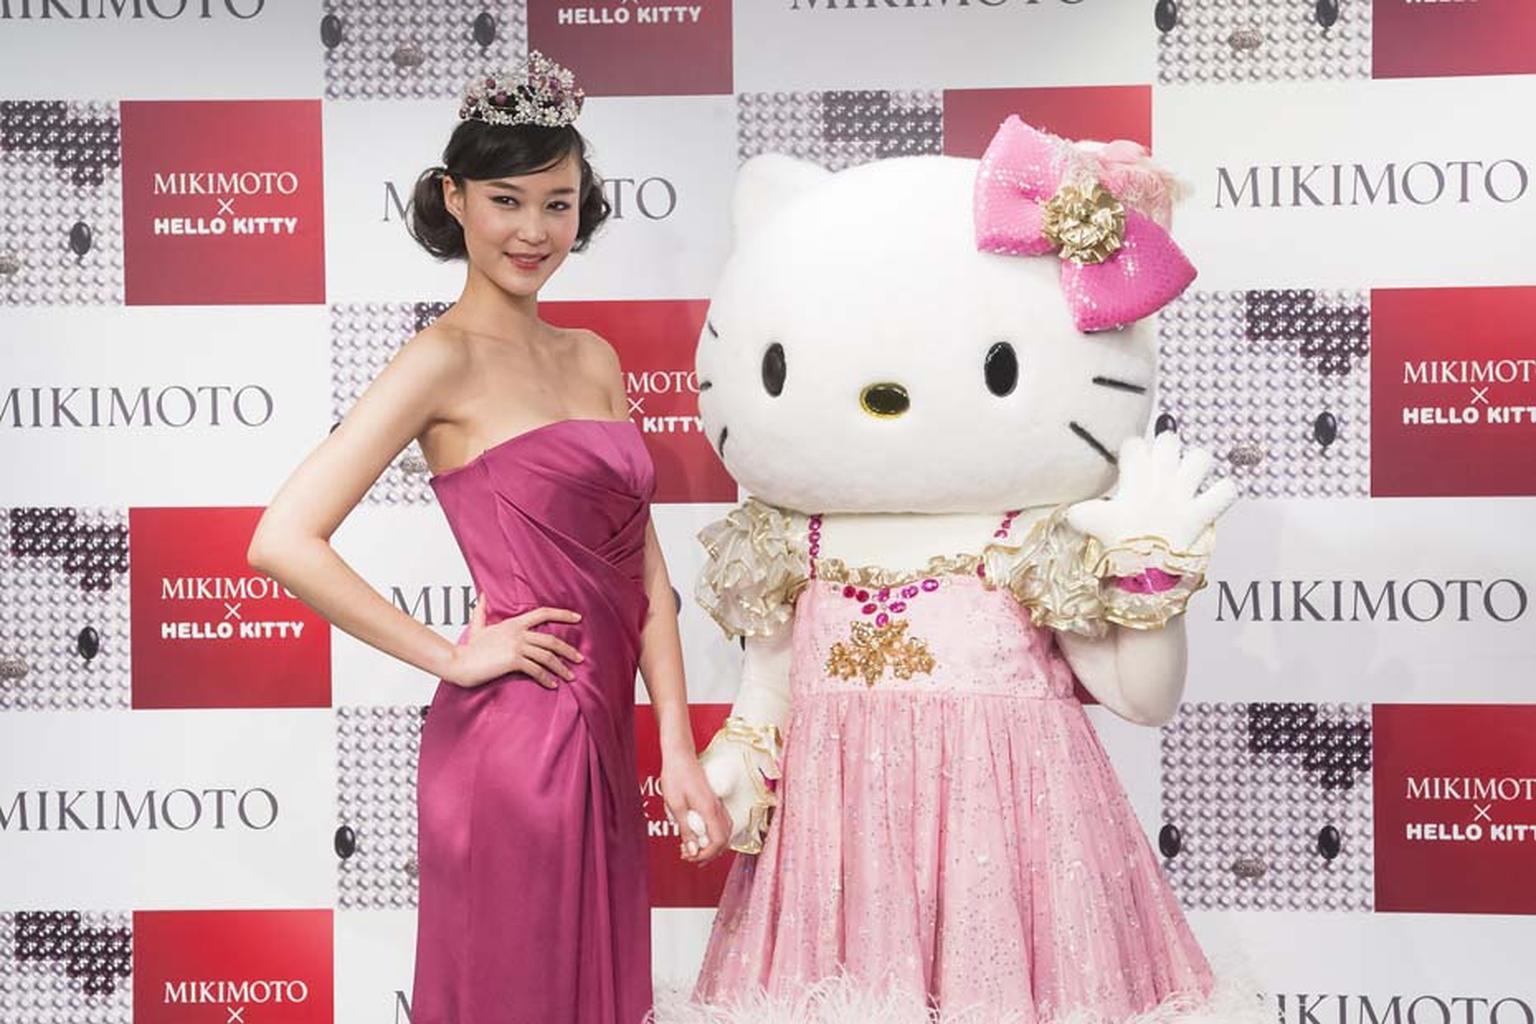 Hello Kitty strikes a pose with a model wearing the Hello Kitty tiara at the Mikimoto x Hello Kitty launch event at Mikimoto's flagship boutique in Tokyo